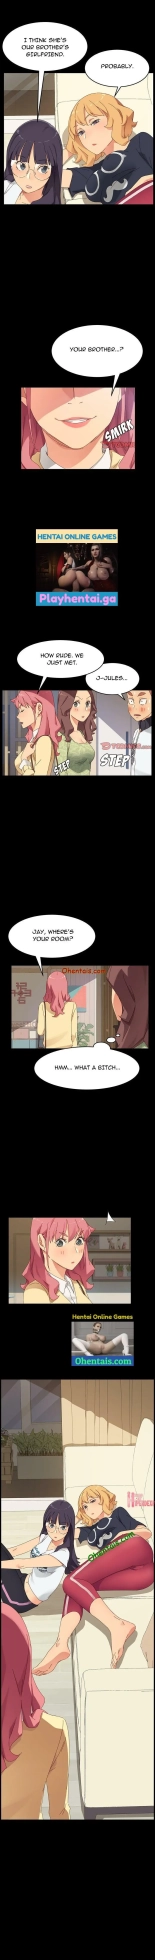 PERFECT ROOMMATES Ch. 7 : page 8